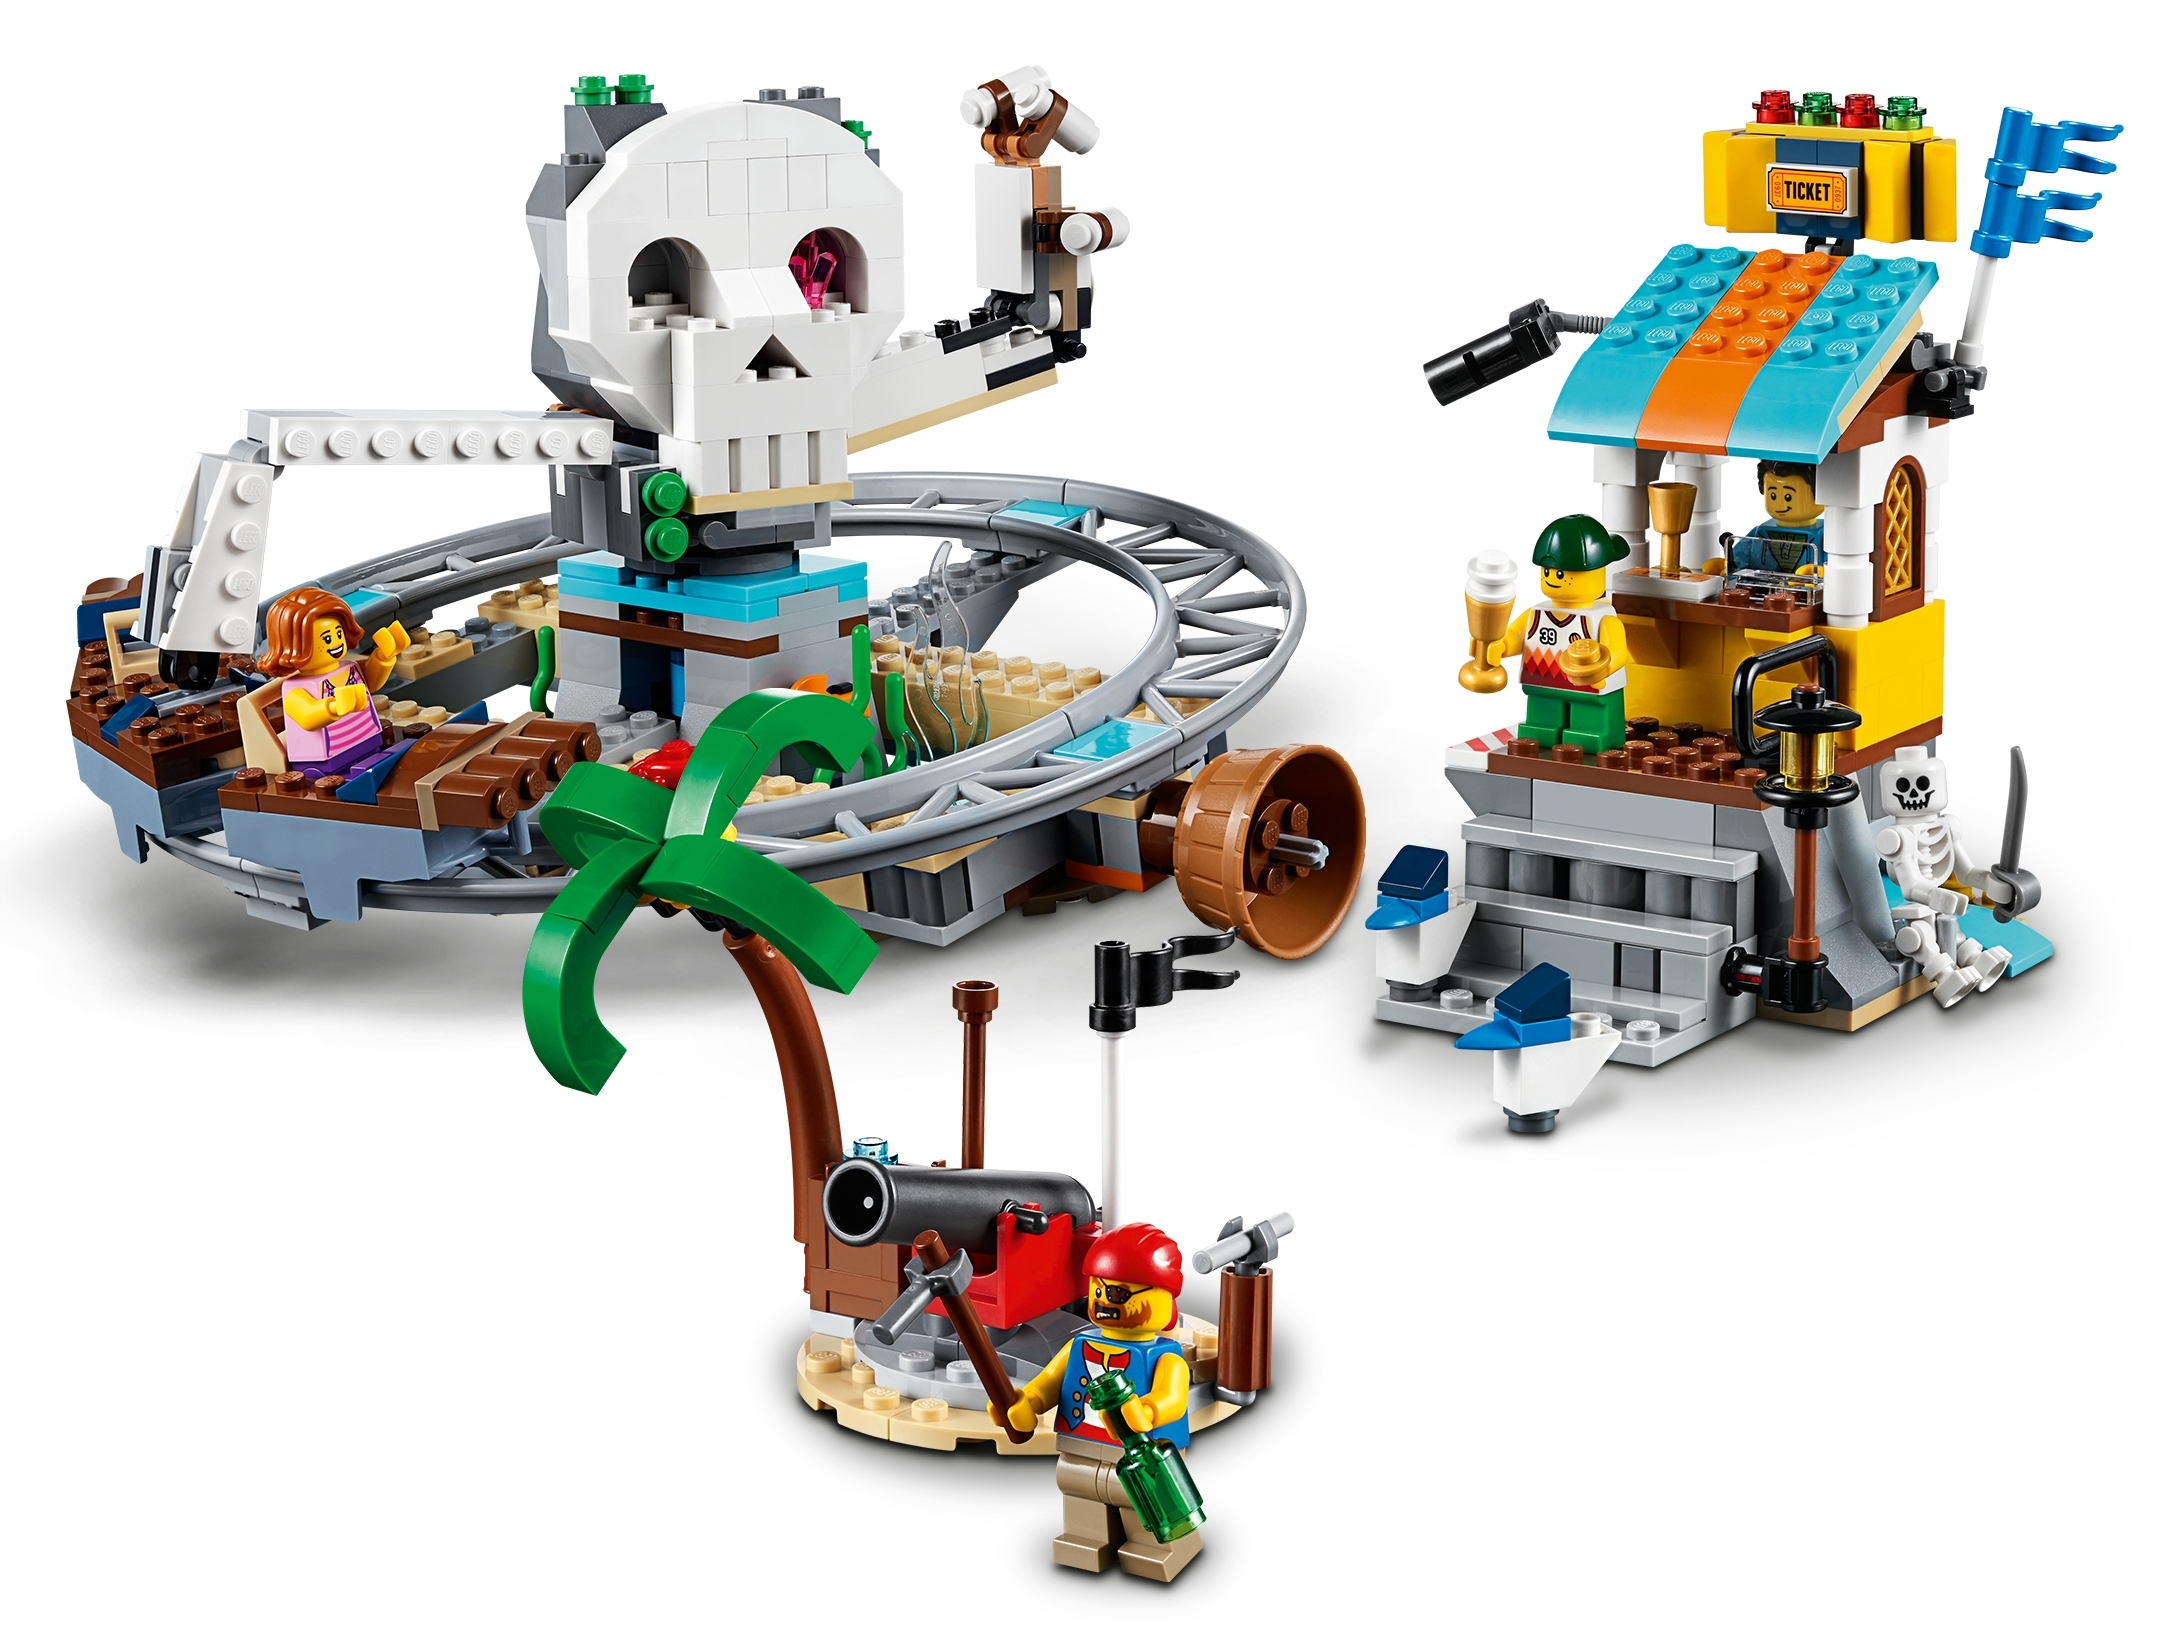 Pirate Roller Coaster 31084 Creator 3-in-1 | Buy online at the Official LEGO® Shop US